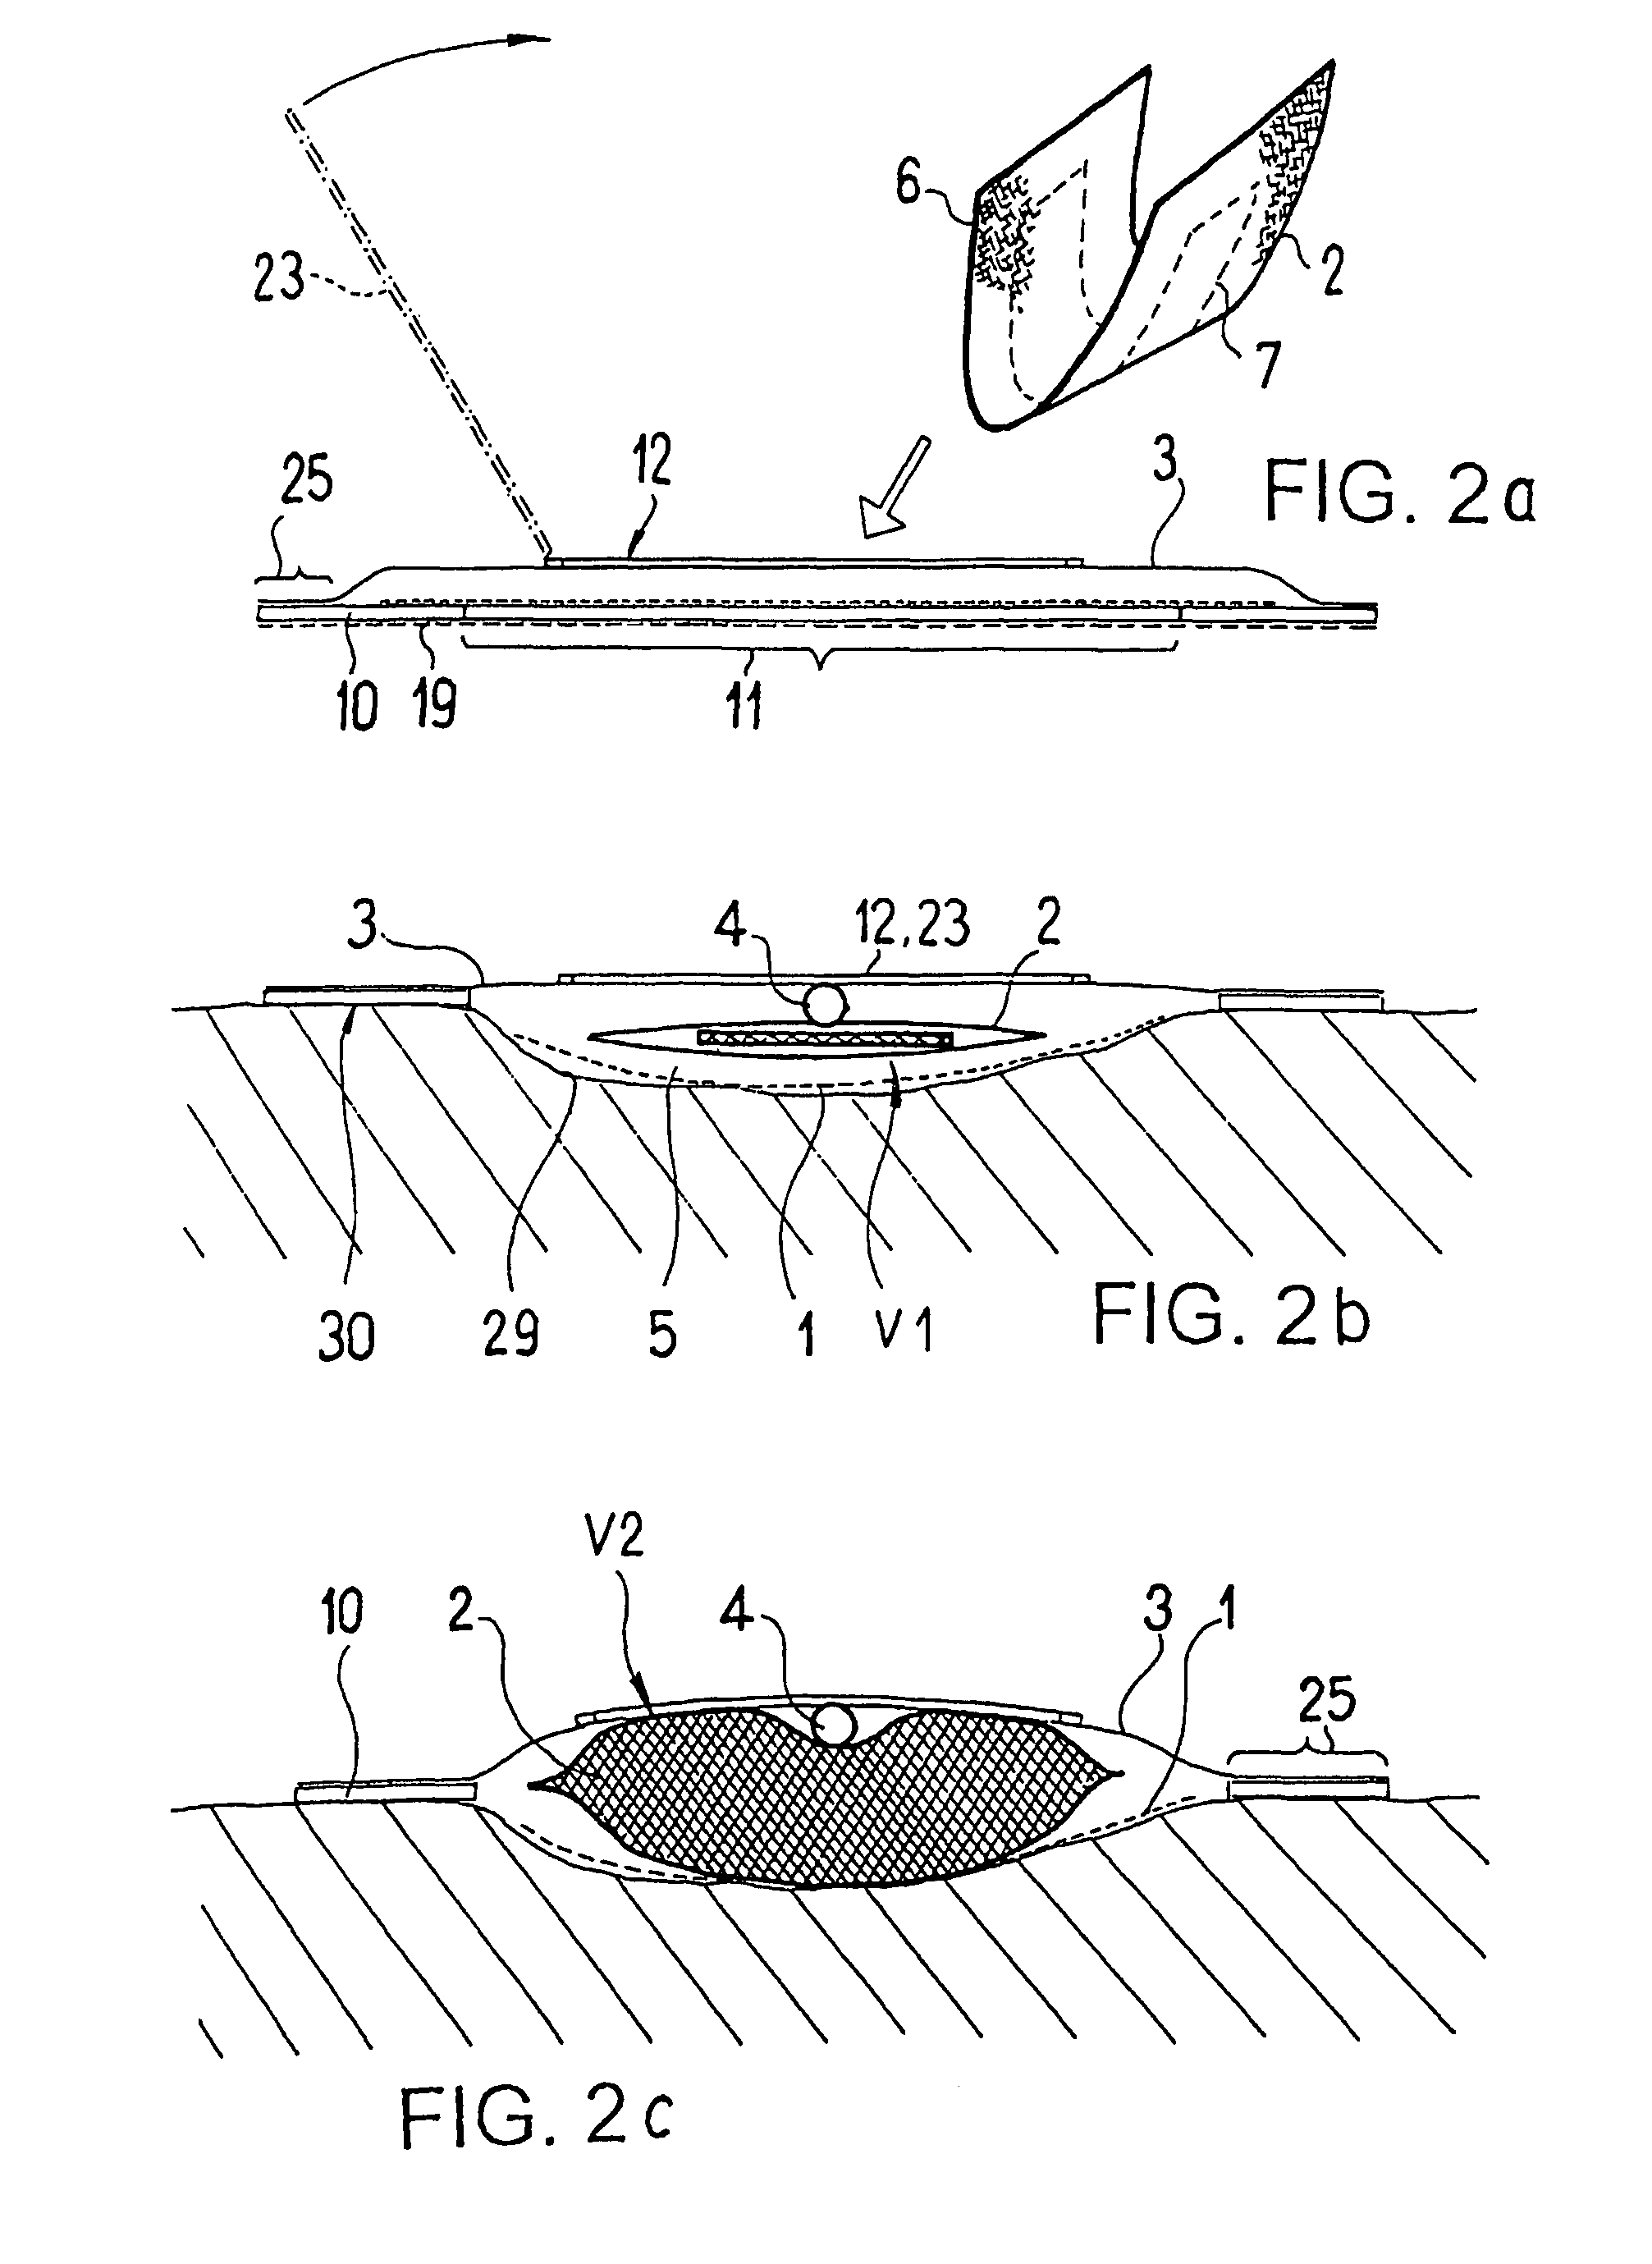 Drainage device for treating wounds using a reduced pressure